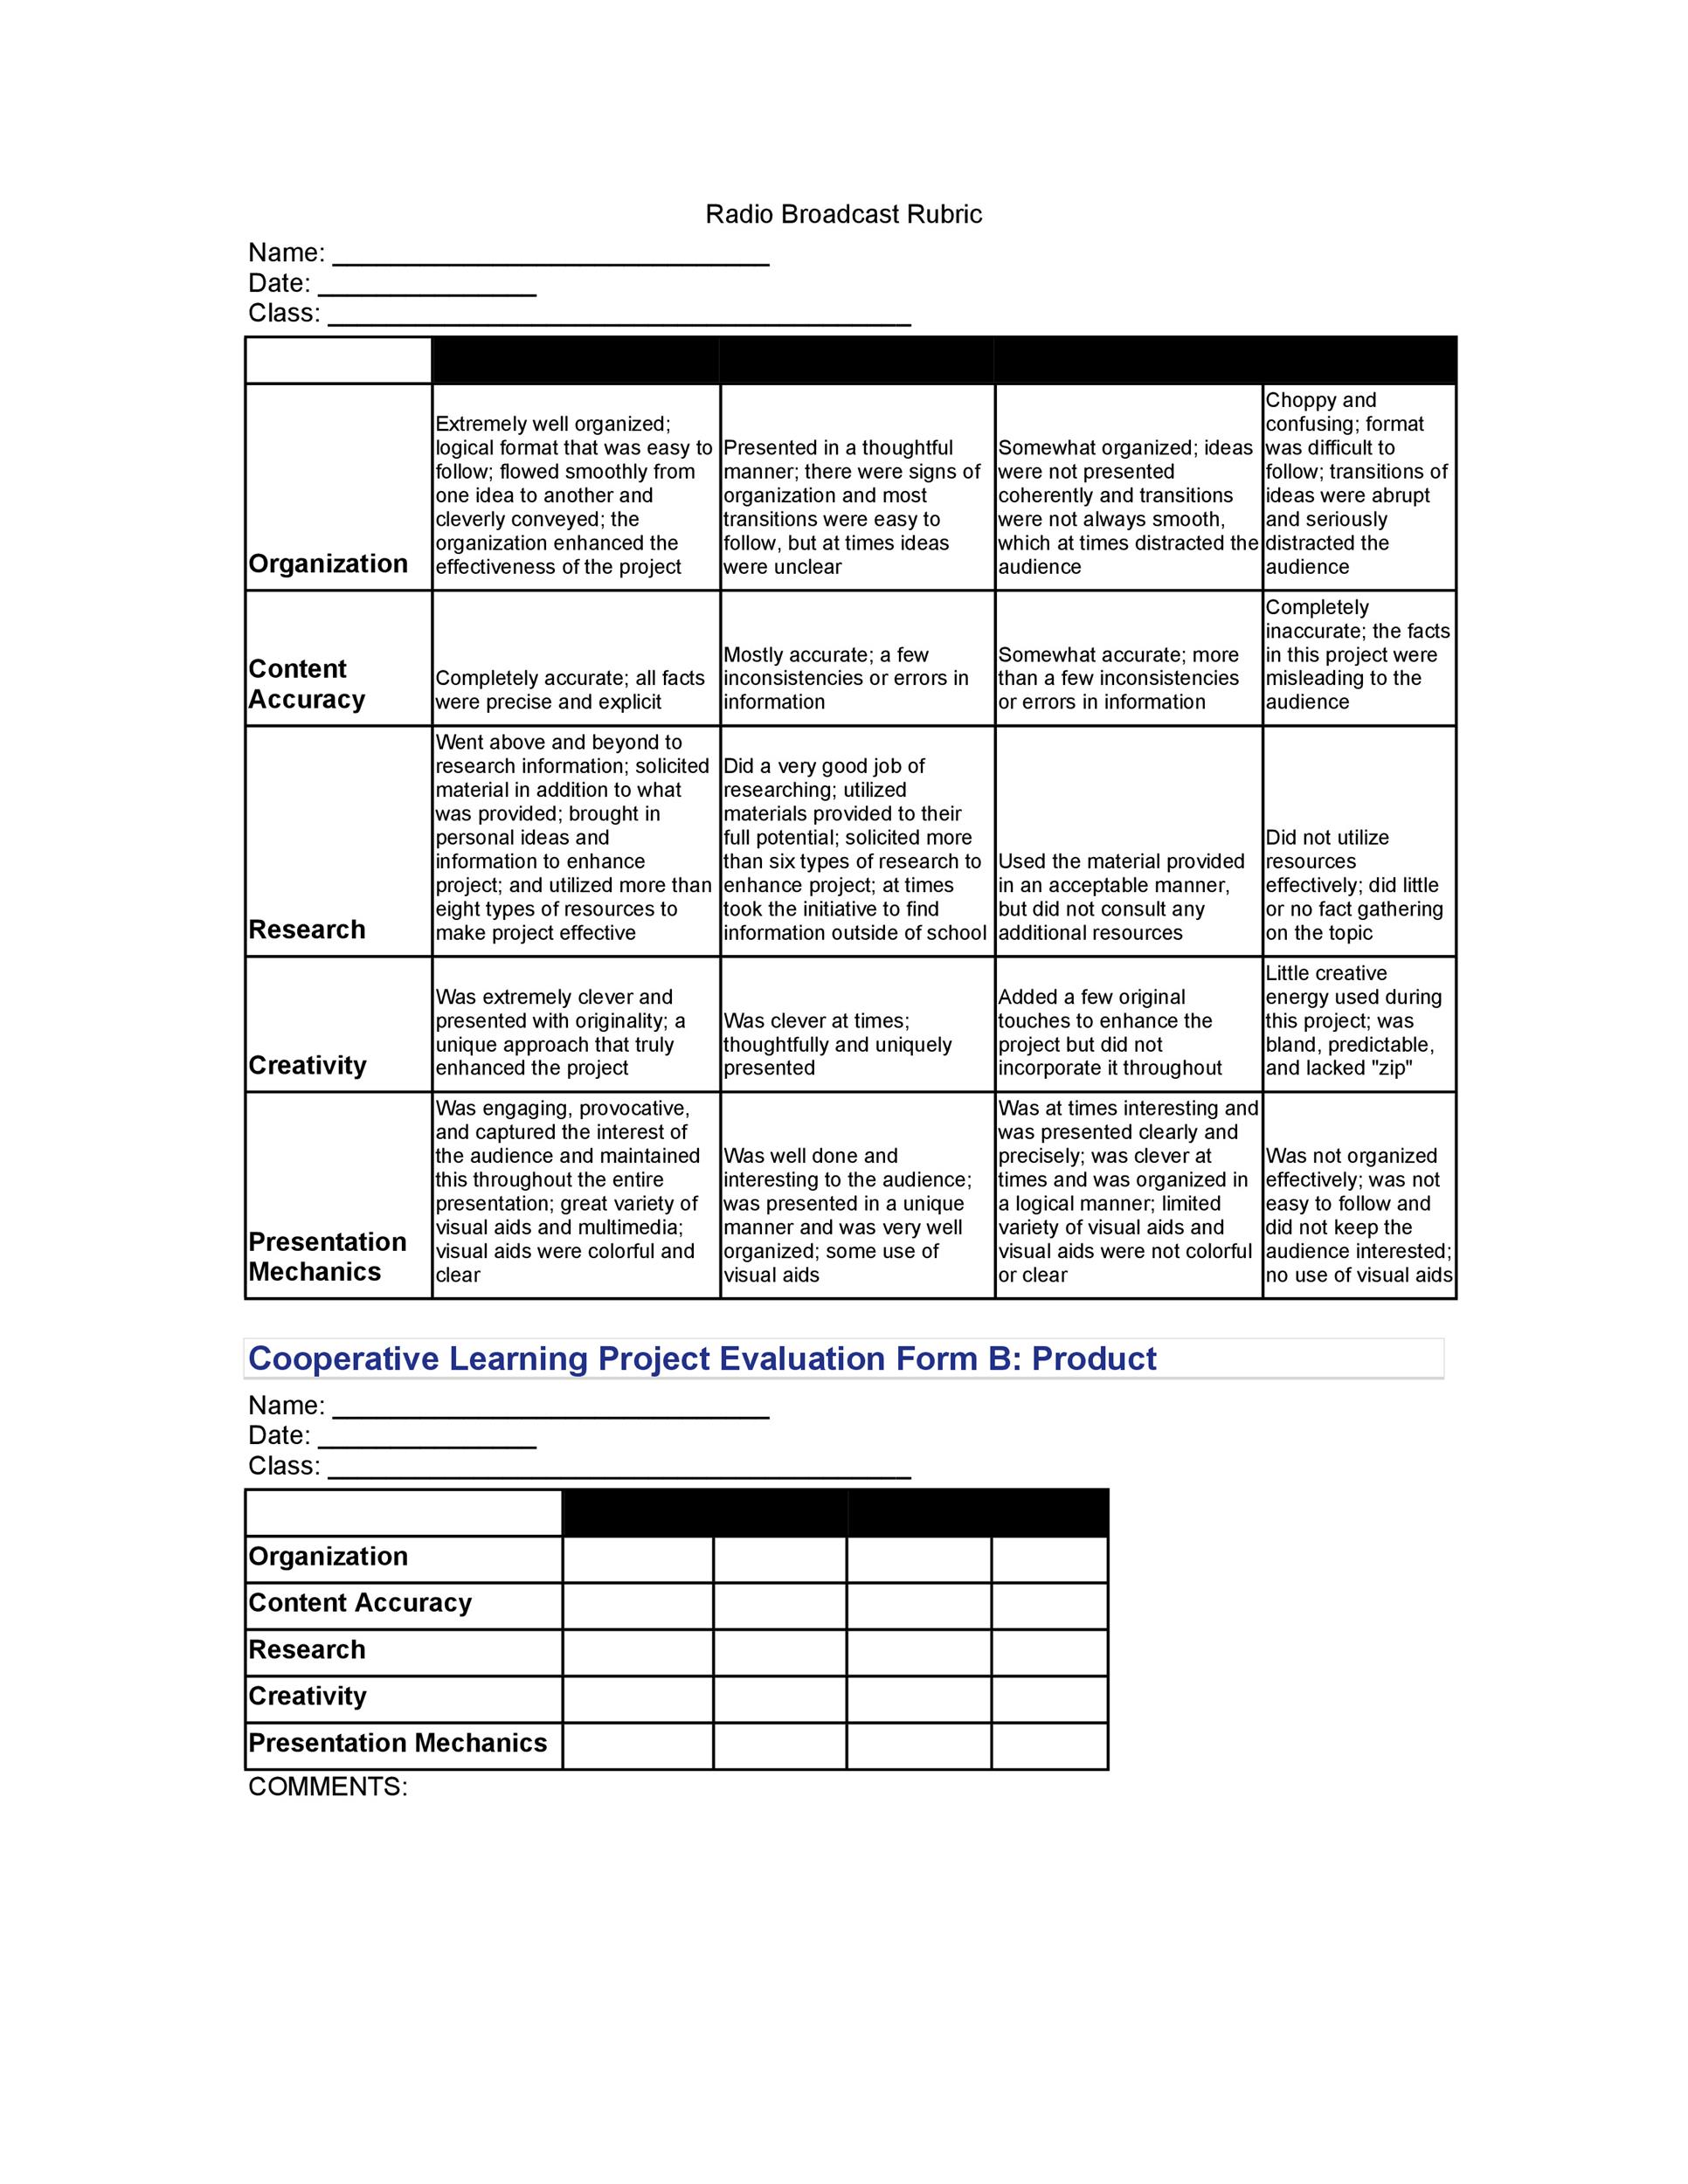 grading-rubric-template-for-projects-master-template-vrogue